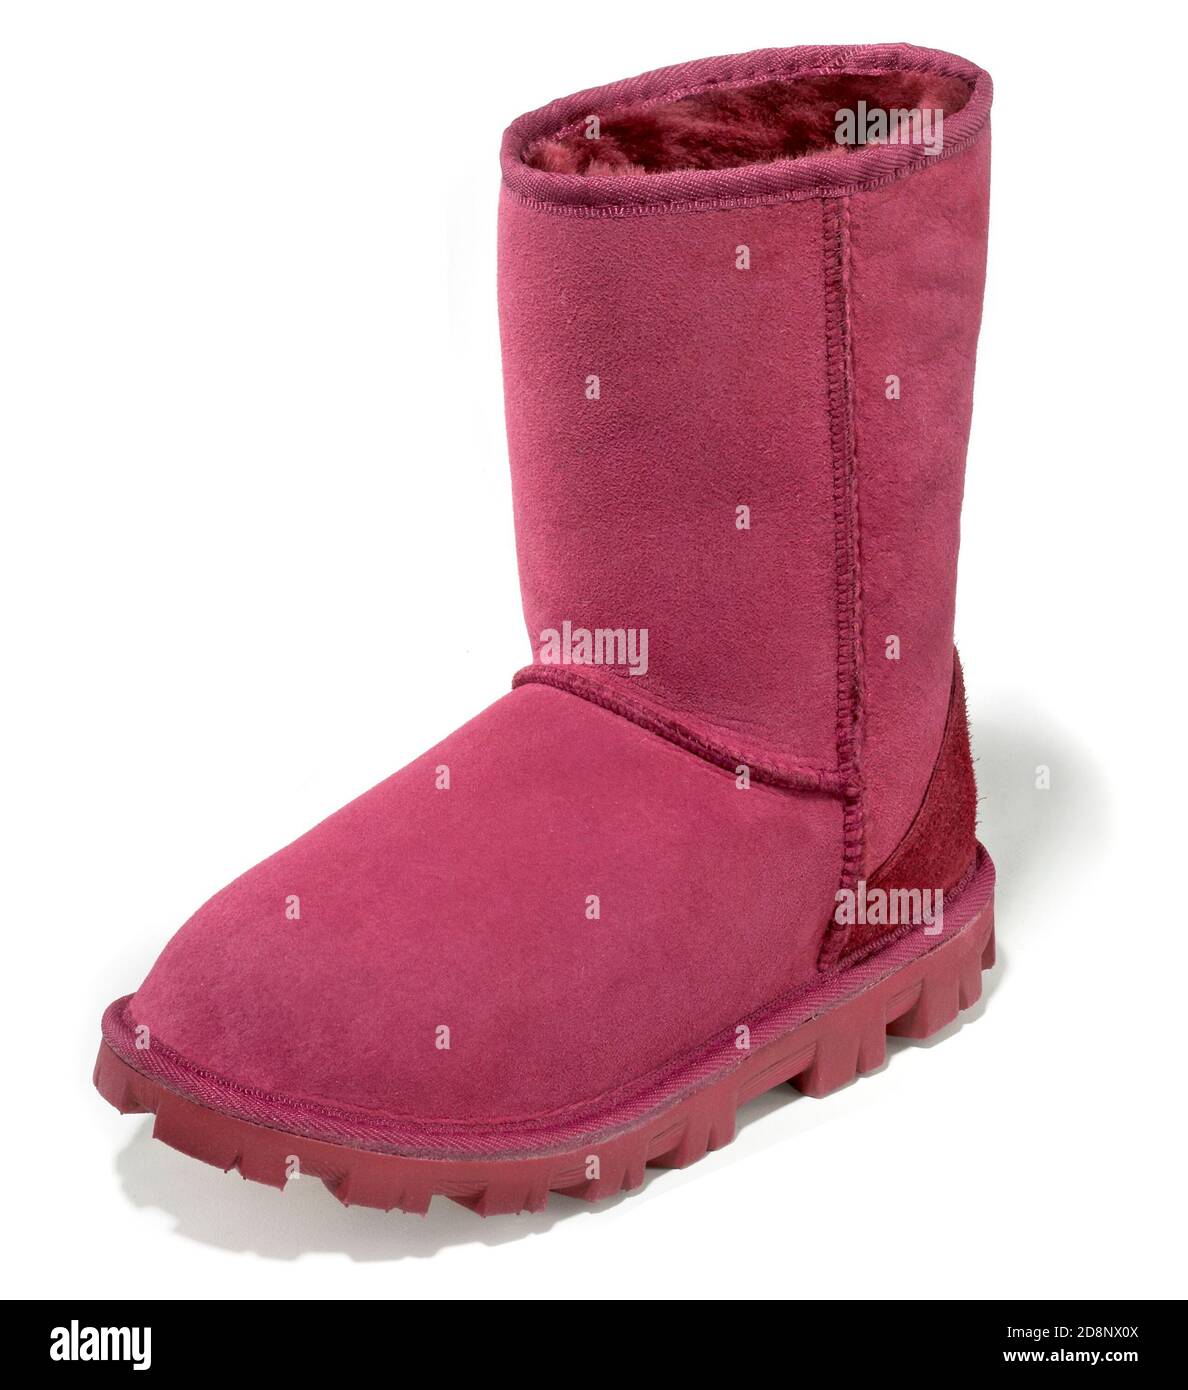 Red Ugg brand boot photographed on a white background Stock Photo - Alamy